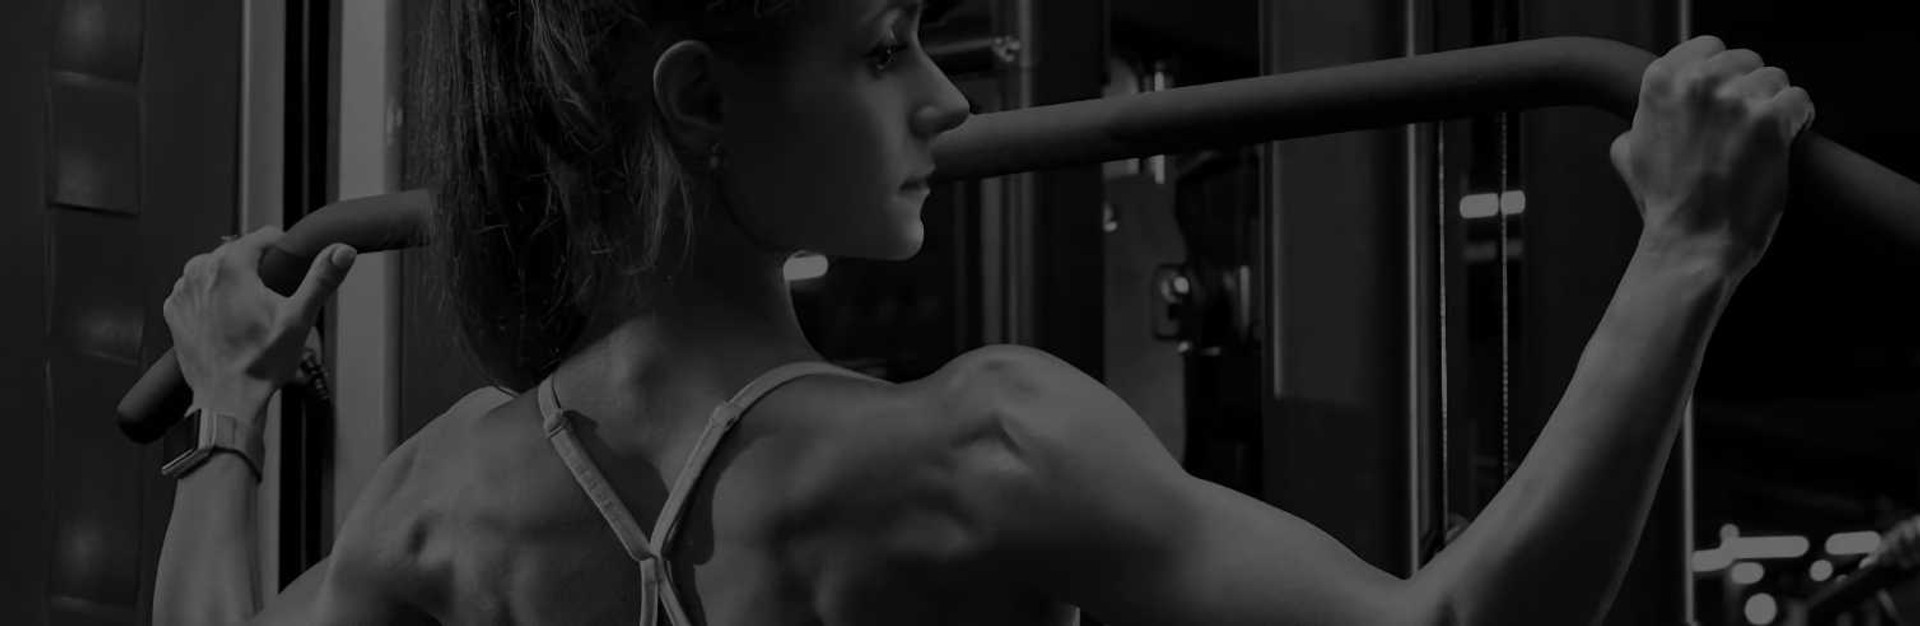 Woman Working Out on Commercial Strength Machine in Gym